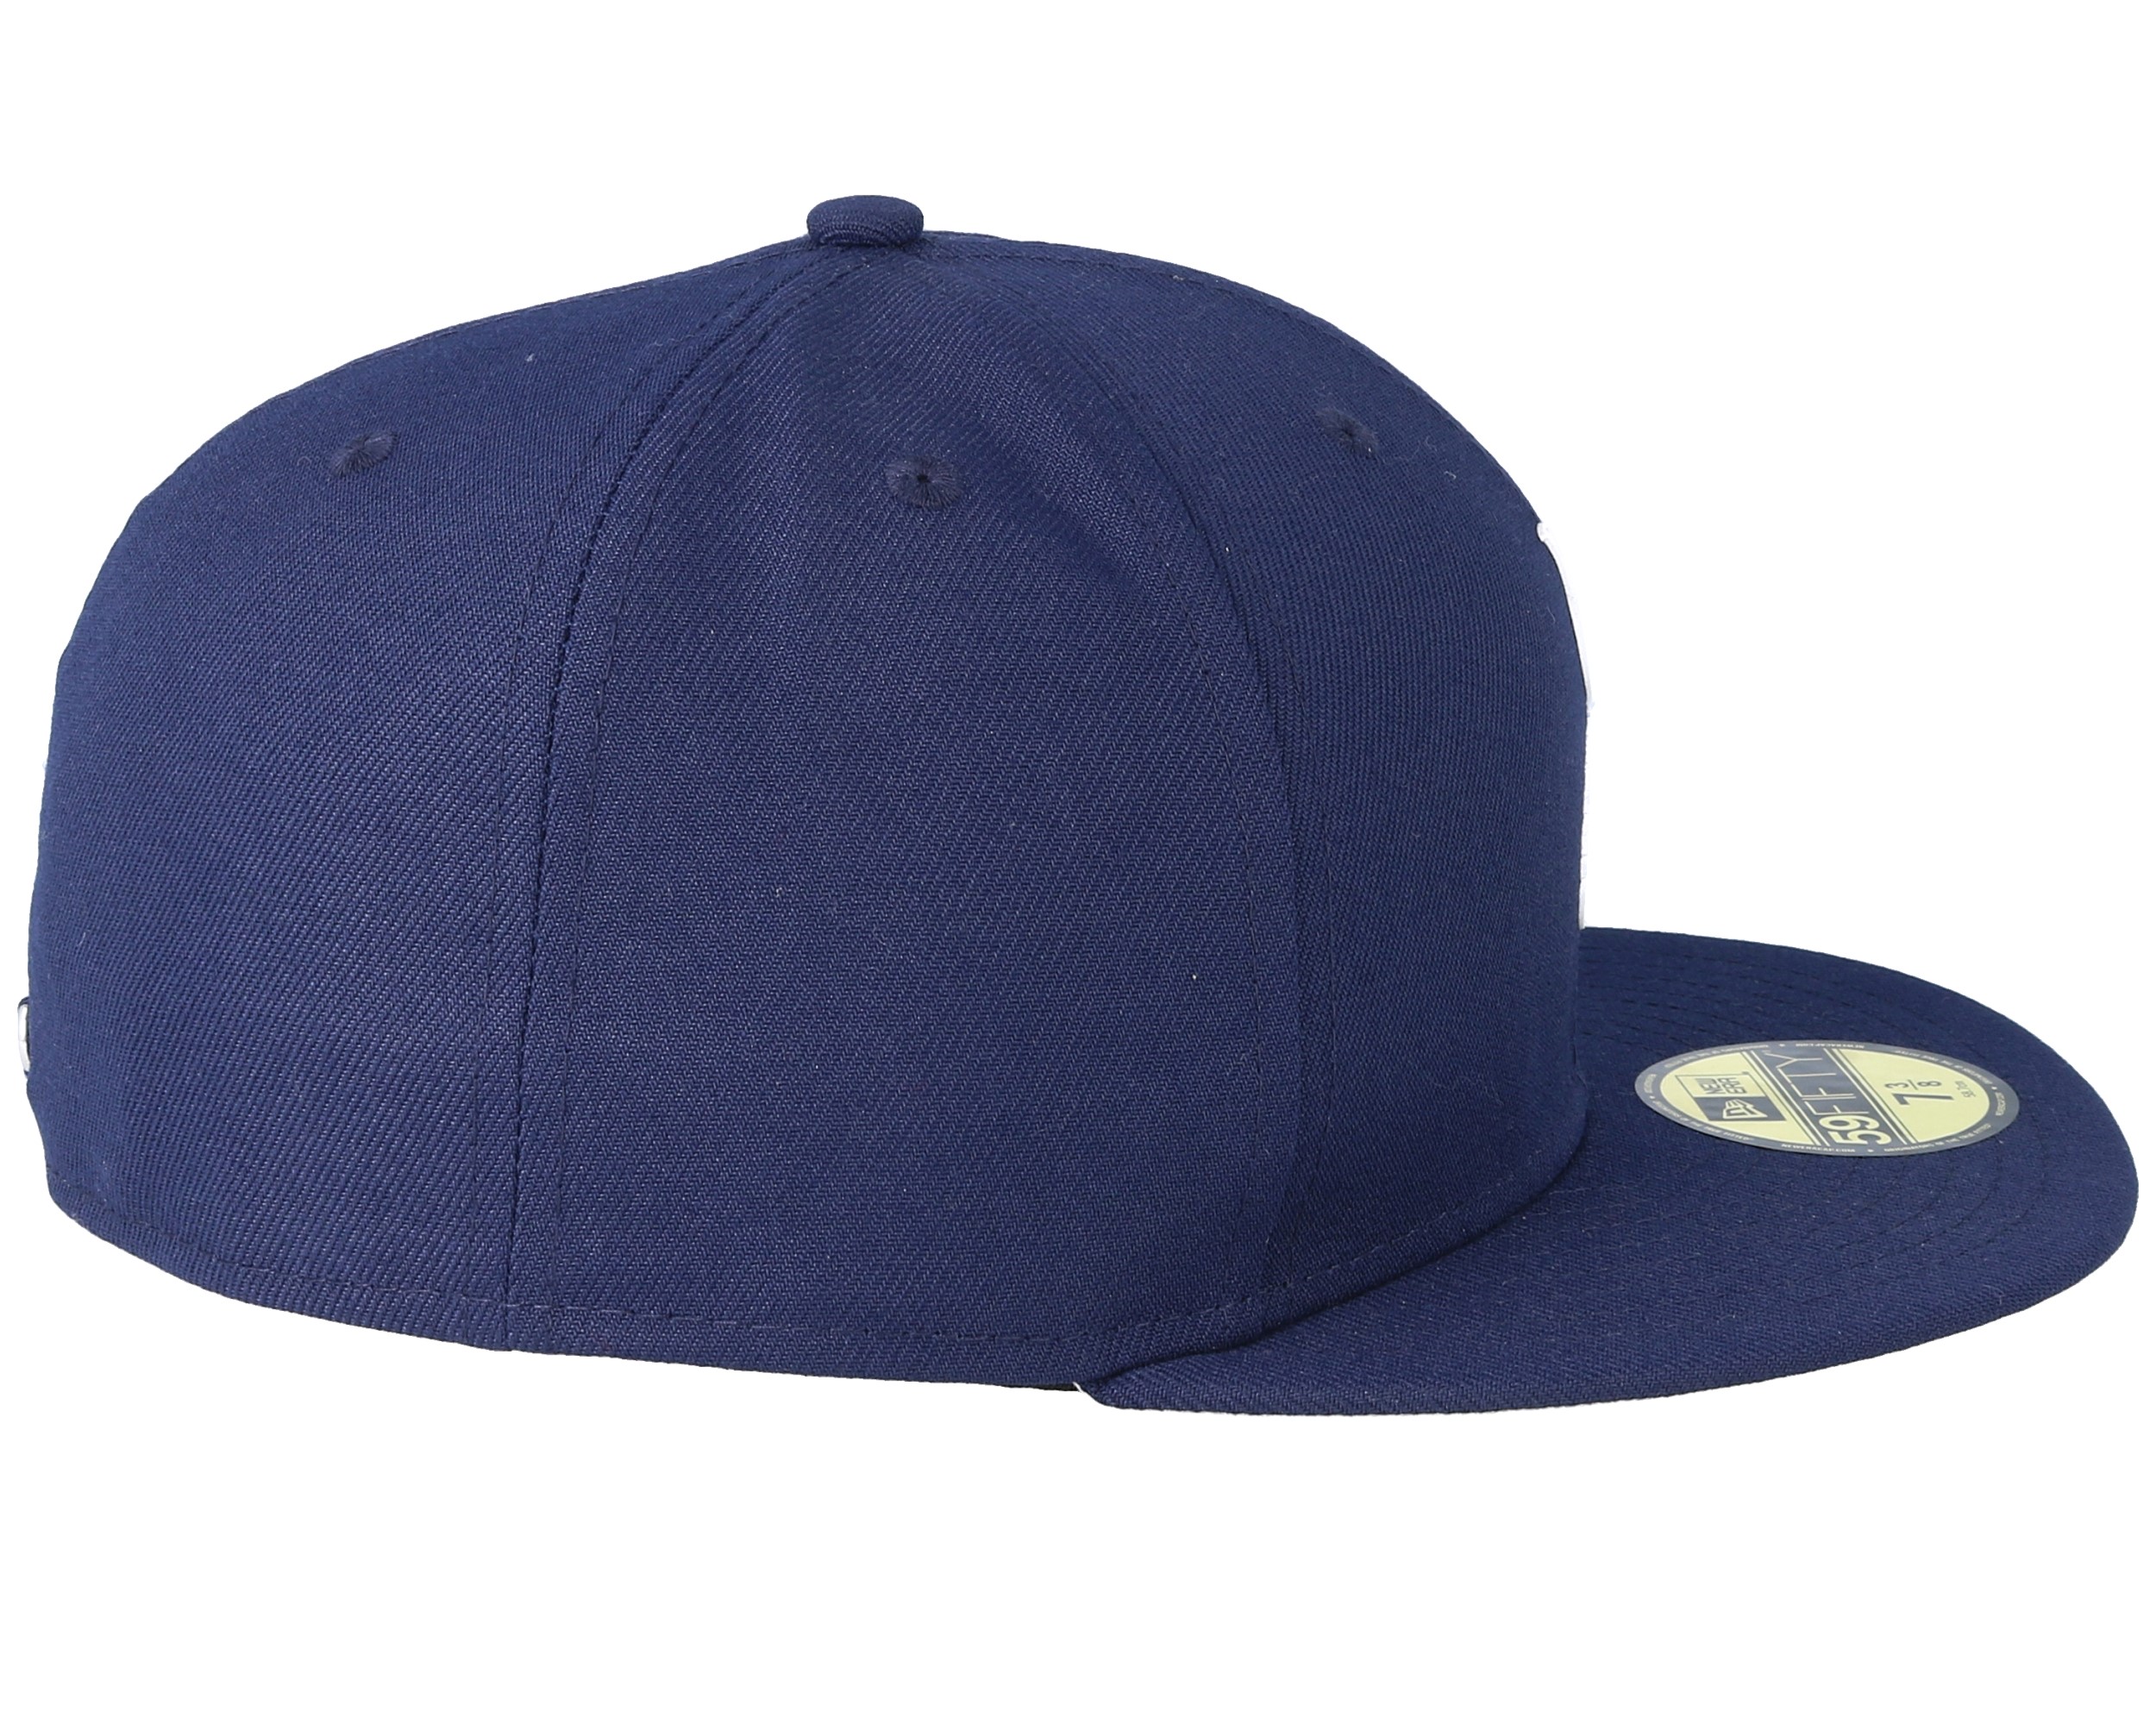 Tottenham Hotspur Fall 19 Fitted 59Fifty Navy/White Fitted - New Era ...